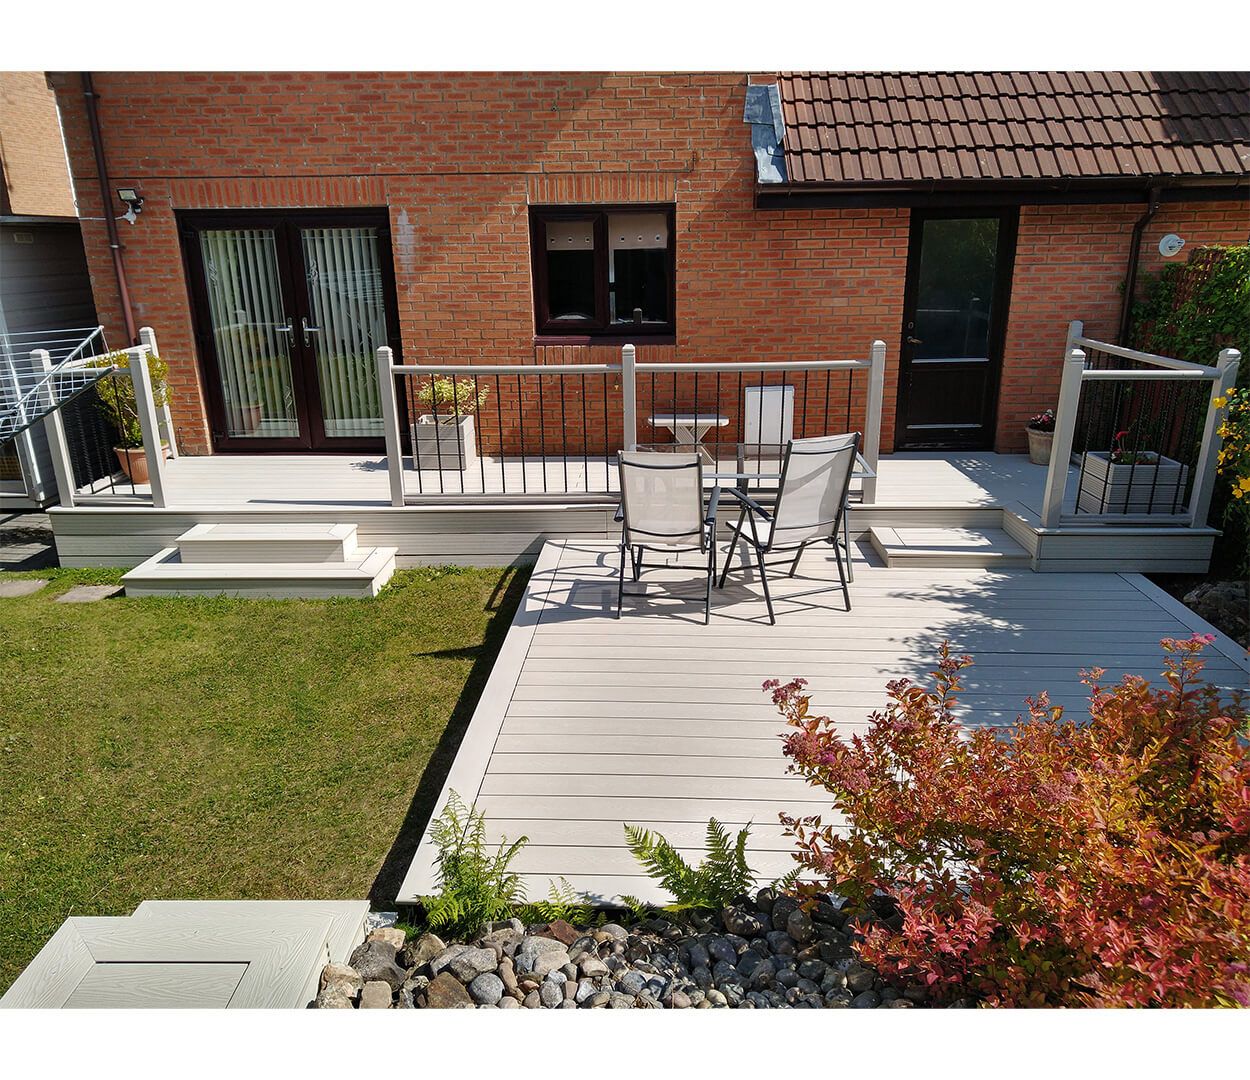 Cladco Composite Decking in Ivory gives this garden a unique and sophisticated look